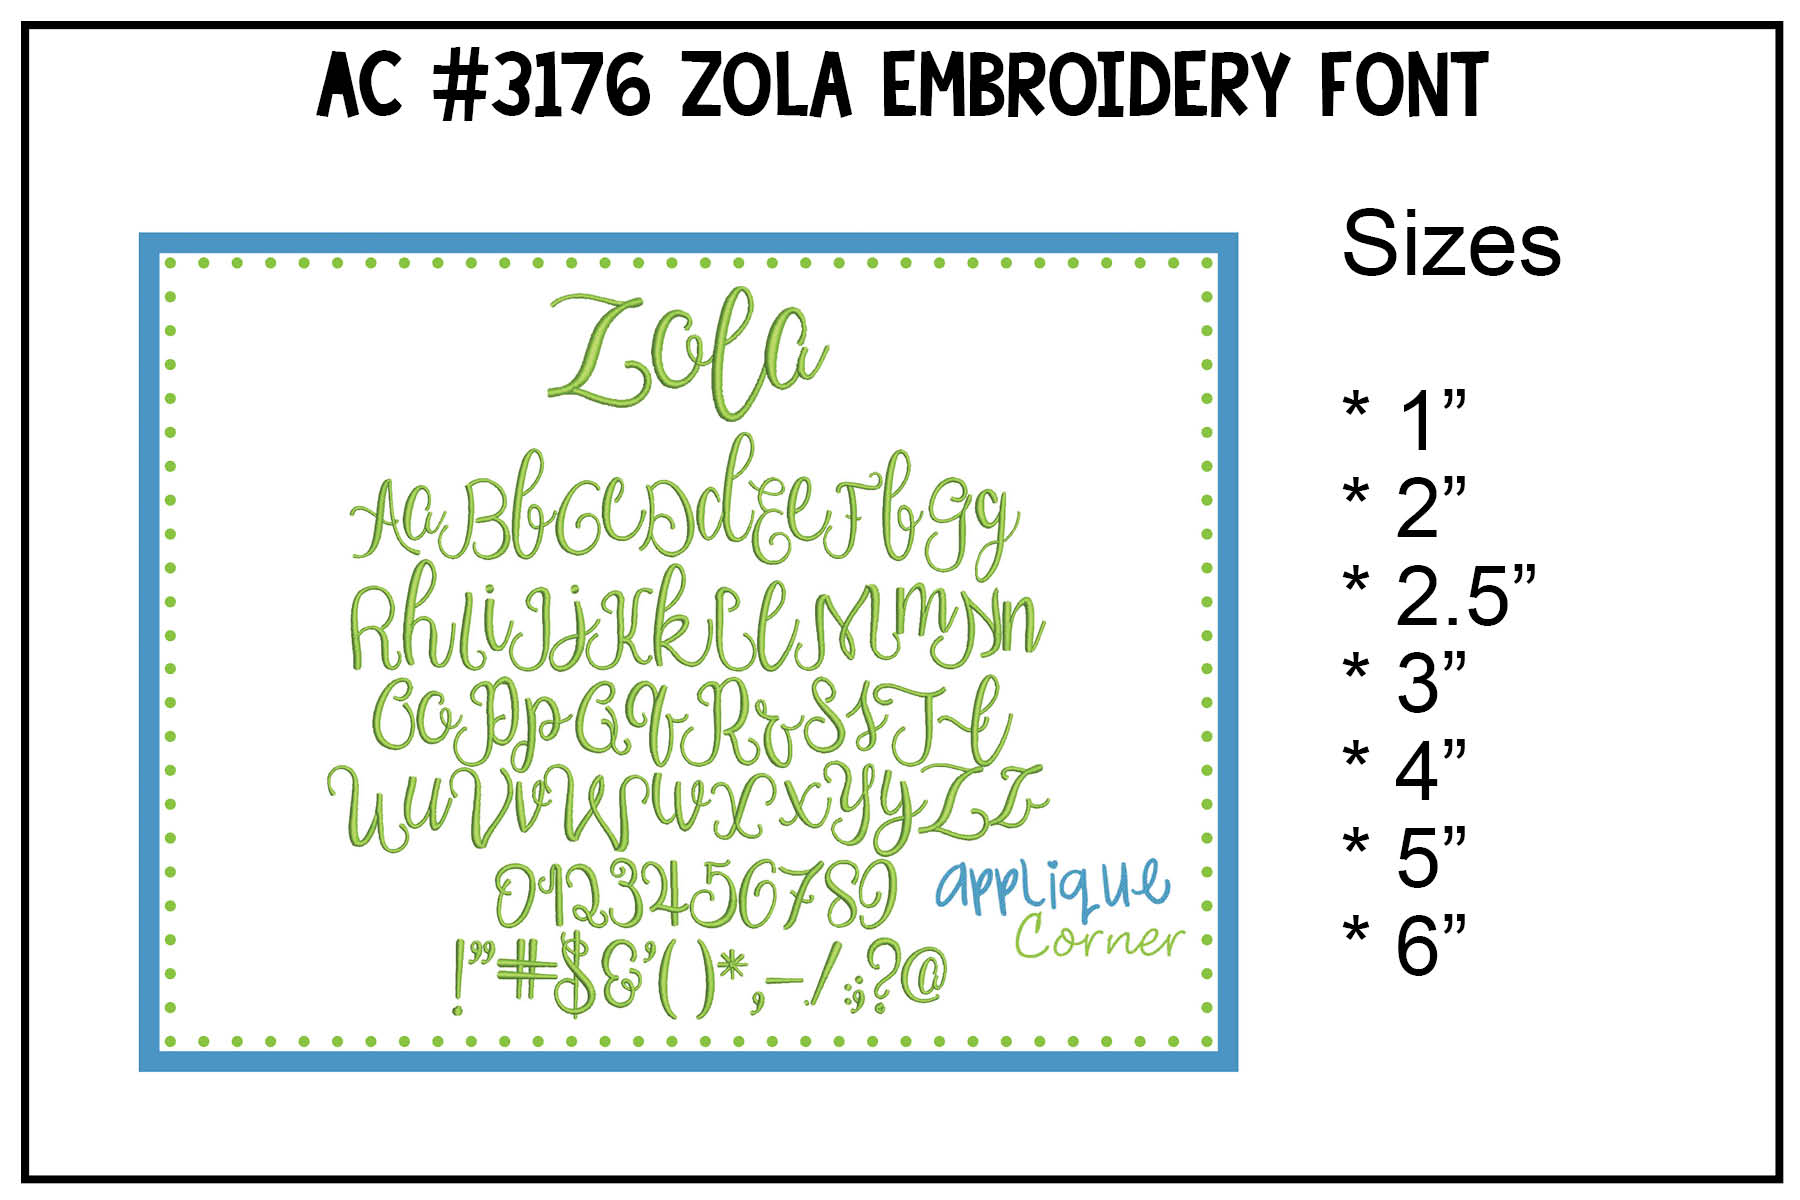 Zola Embroidery Font